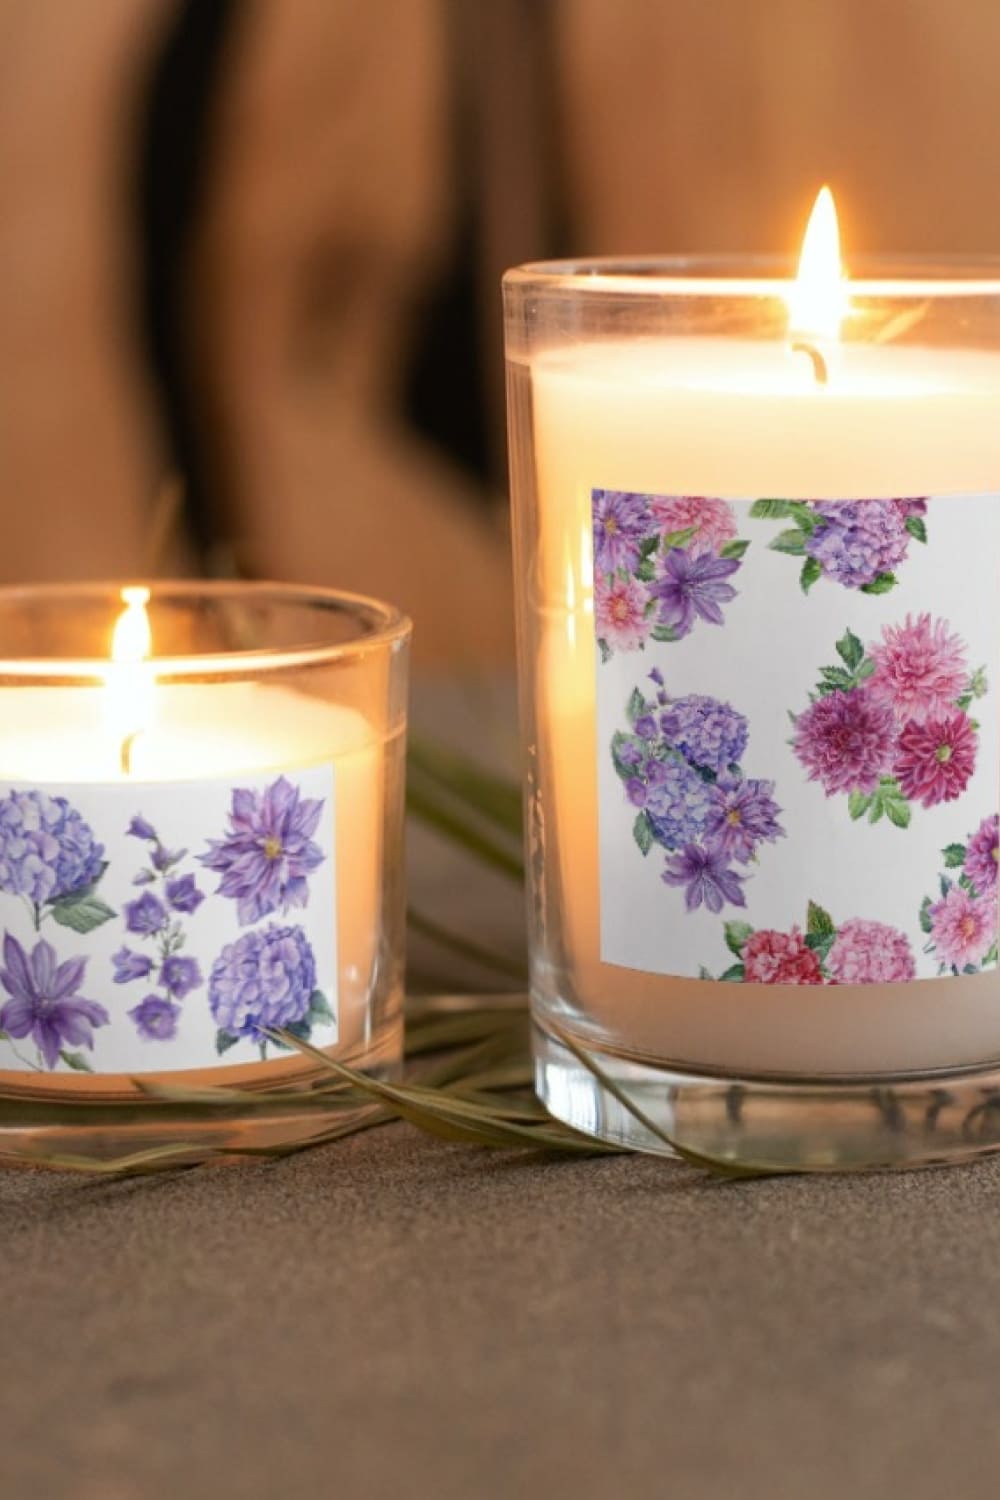 Beautiful flowers for a candle.